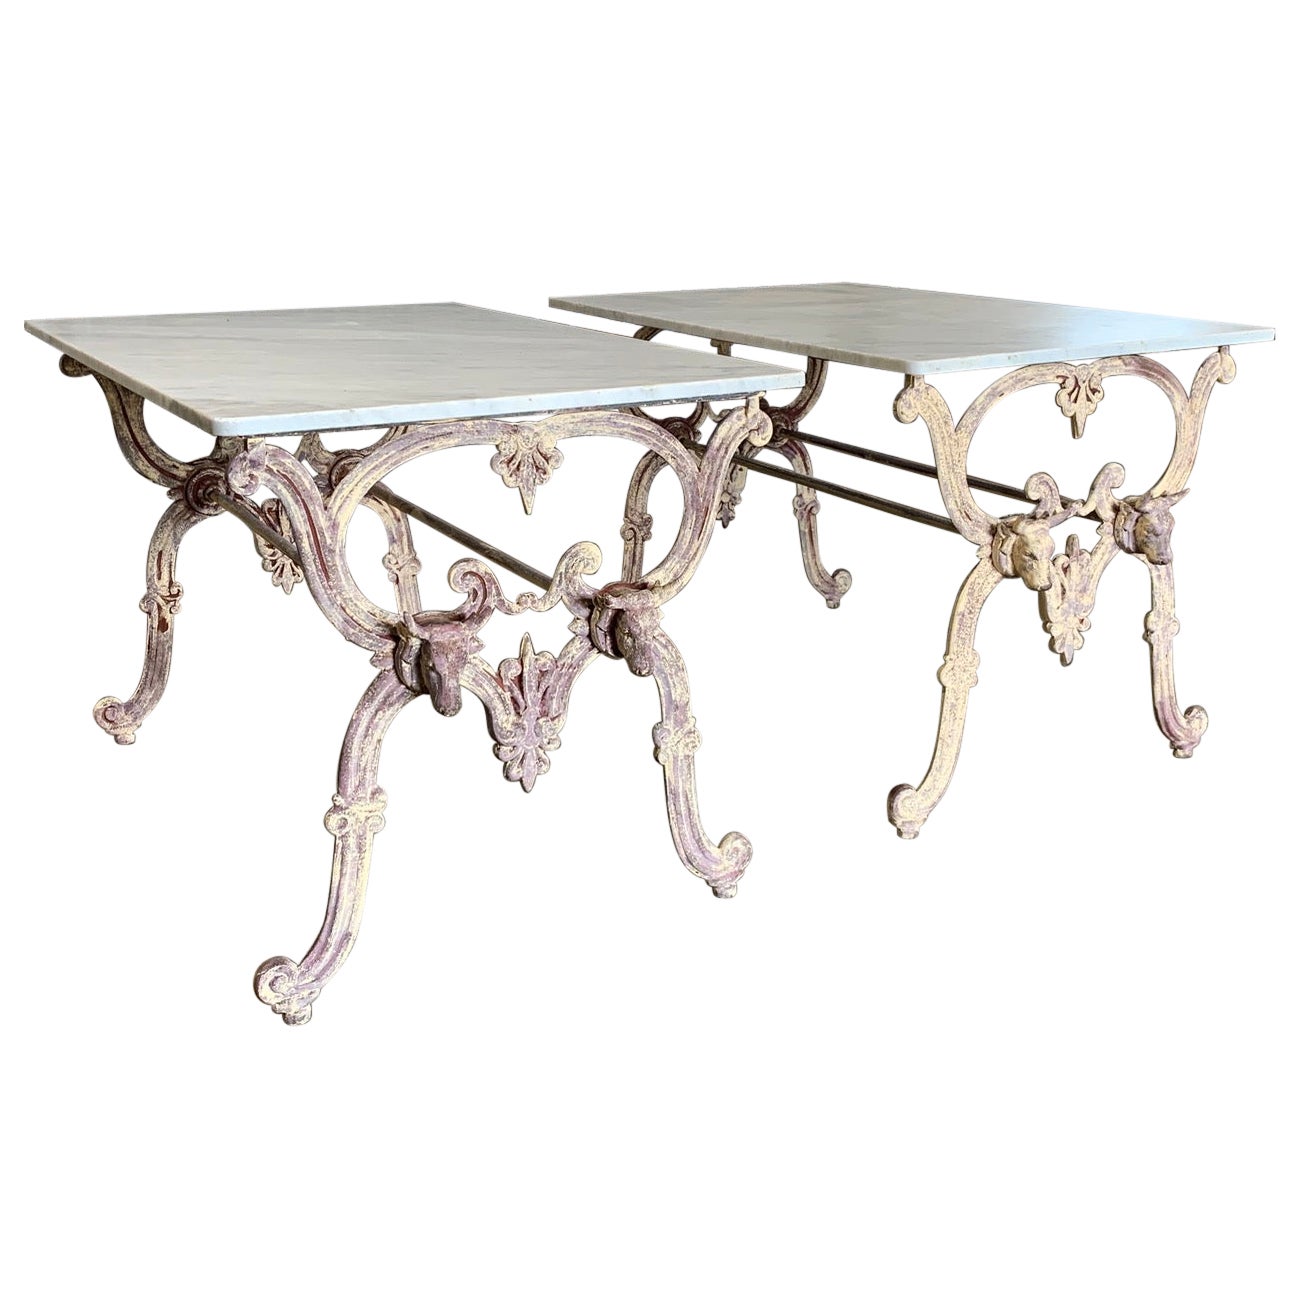 Exceptional Pair Of 19th Century French Butchers Tables